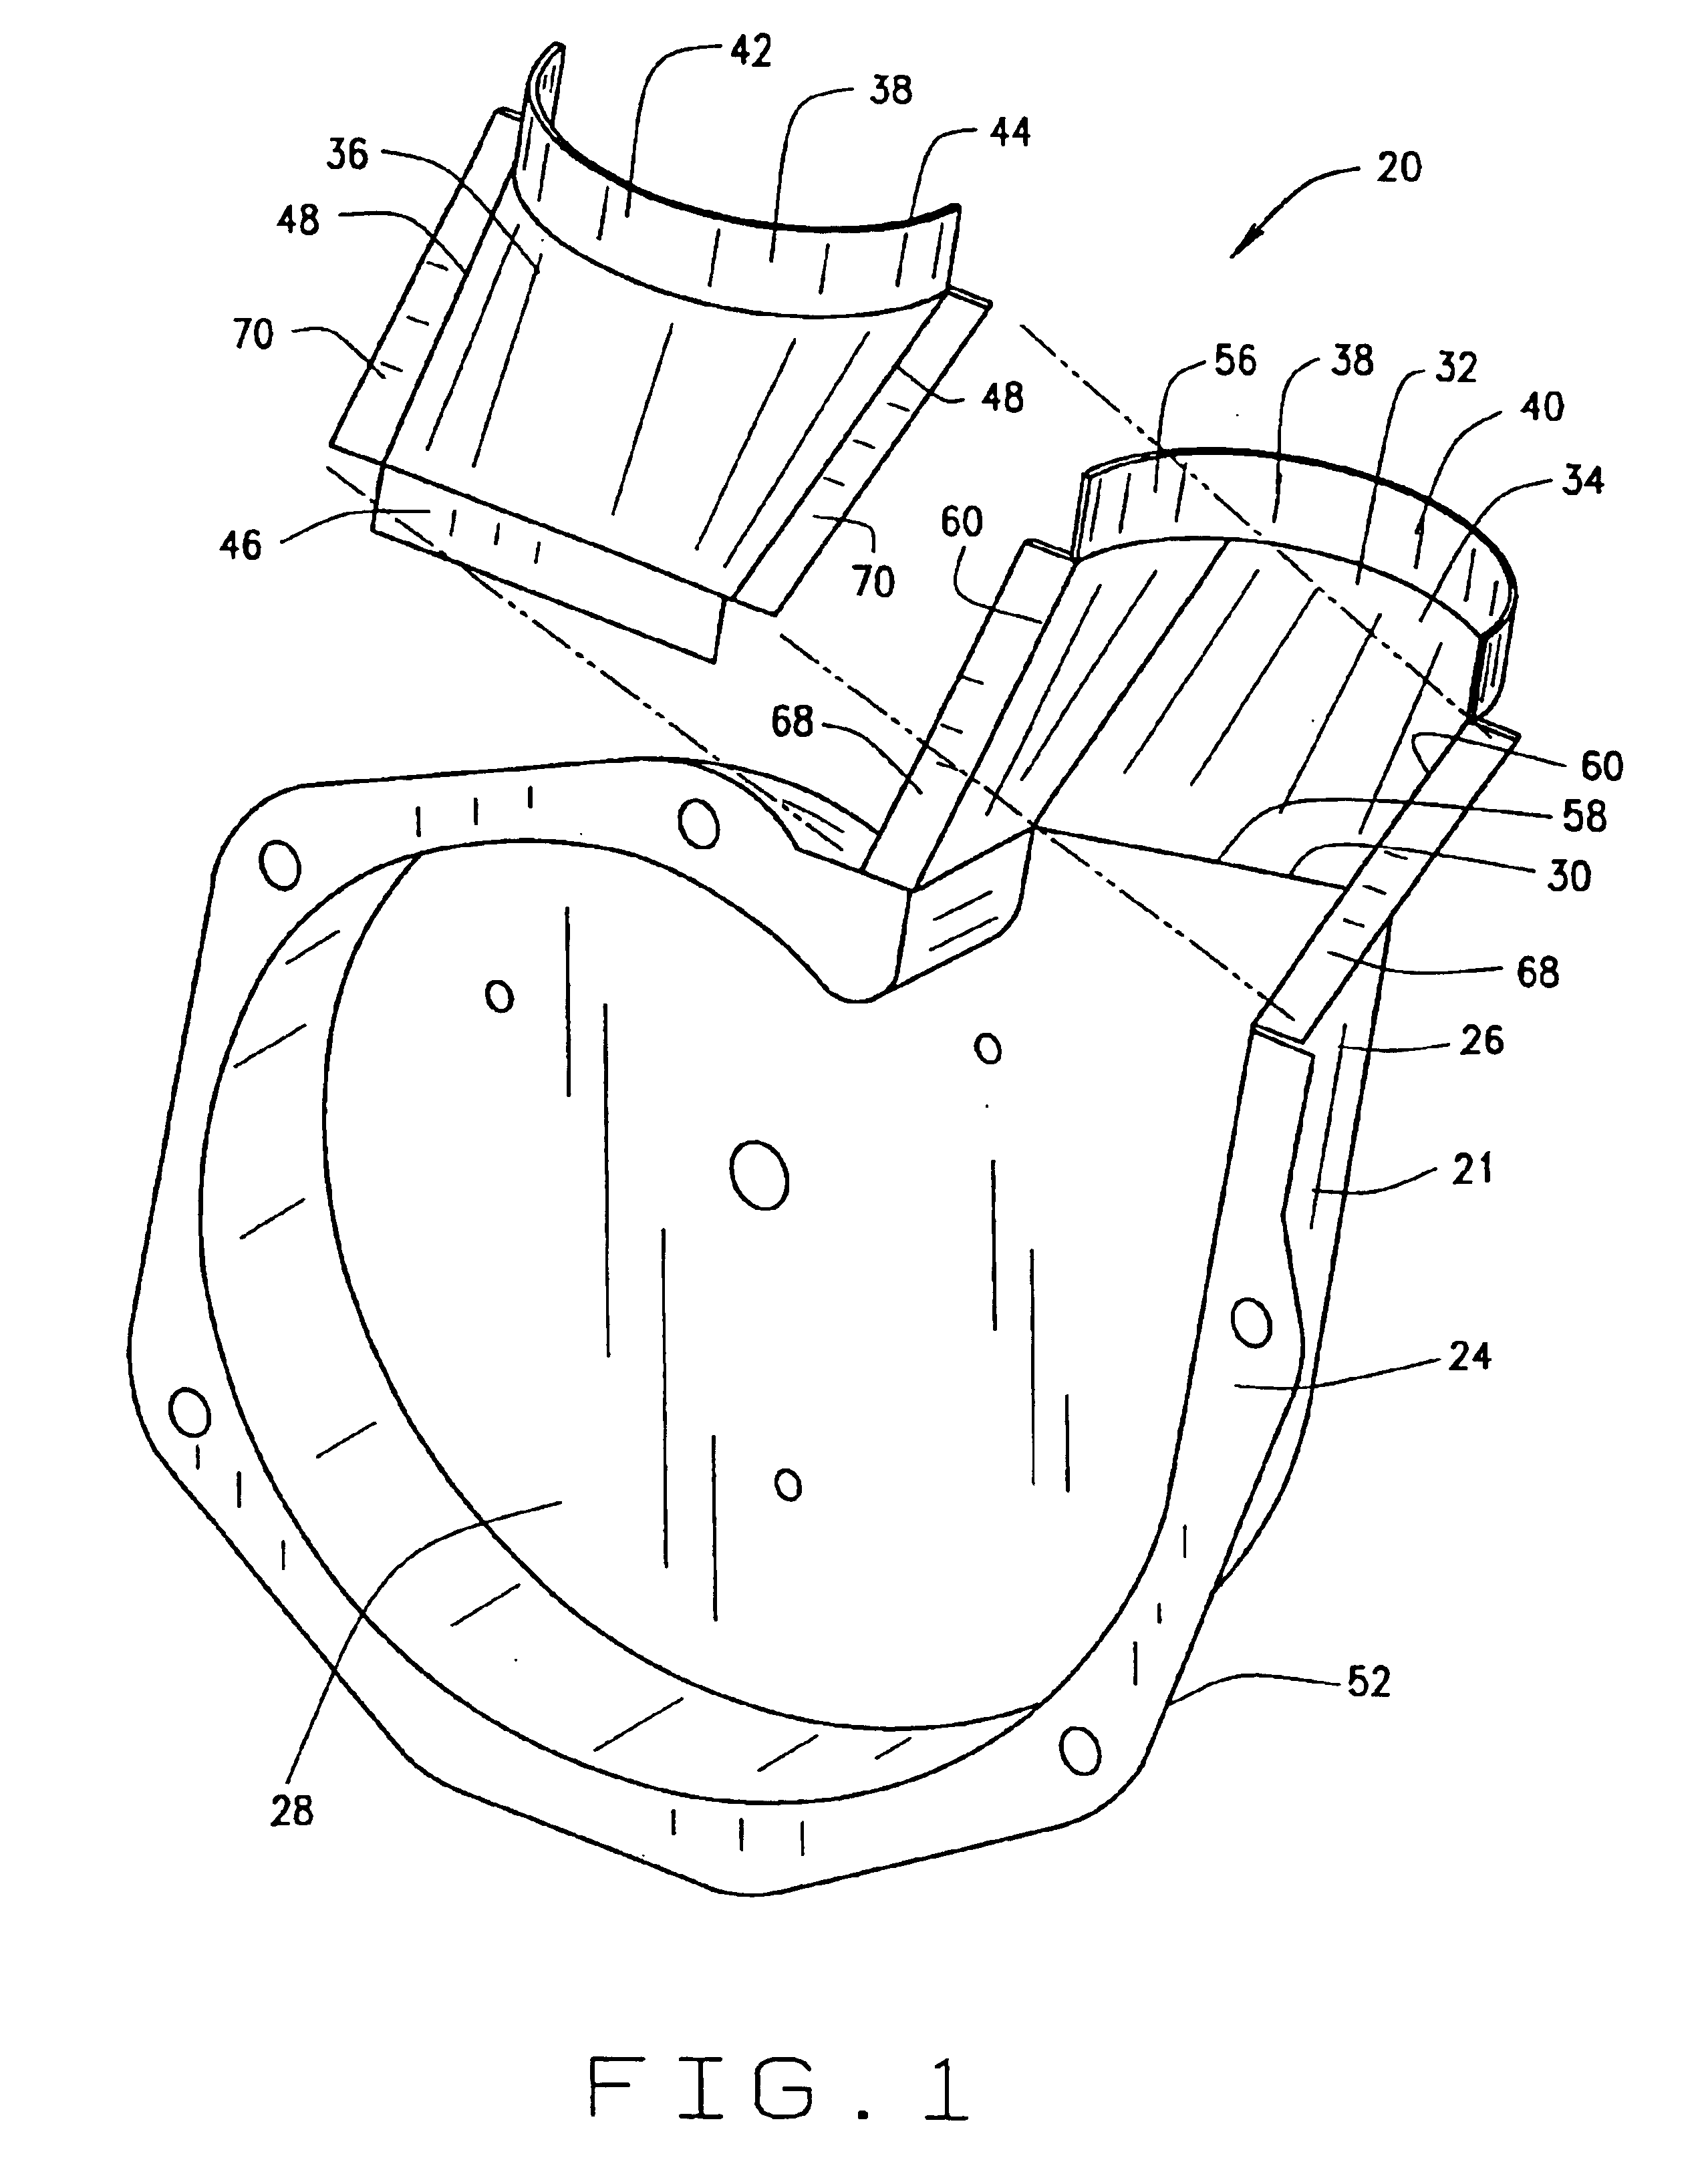 Furnace blower housing with integrally formed exhaust transition